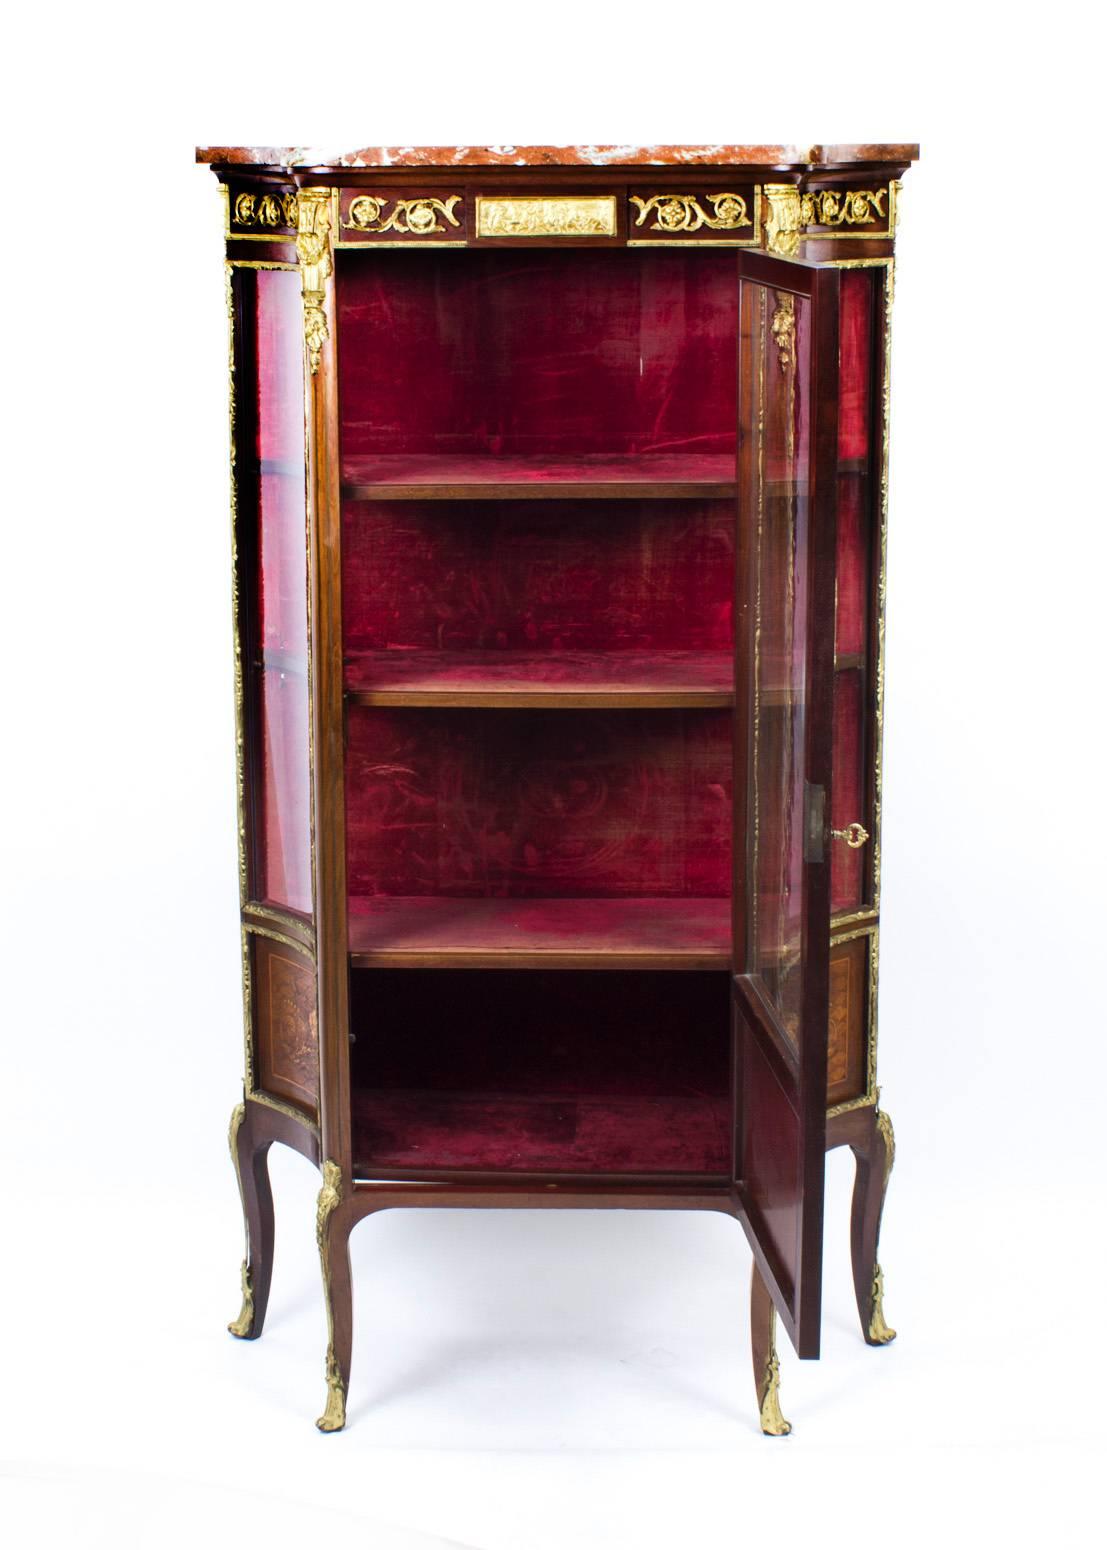 This is a stunning antique French mahogany and ormolu-mounted display cabinet in the French Louis XV manner, circa 1870 in date.

This beautiful cabinet has an abundance of exquisite ormolu mounts as well as intricate inlaid parquetry and marquetry